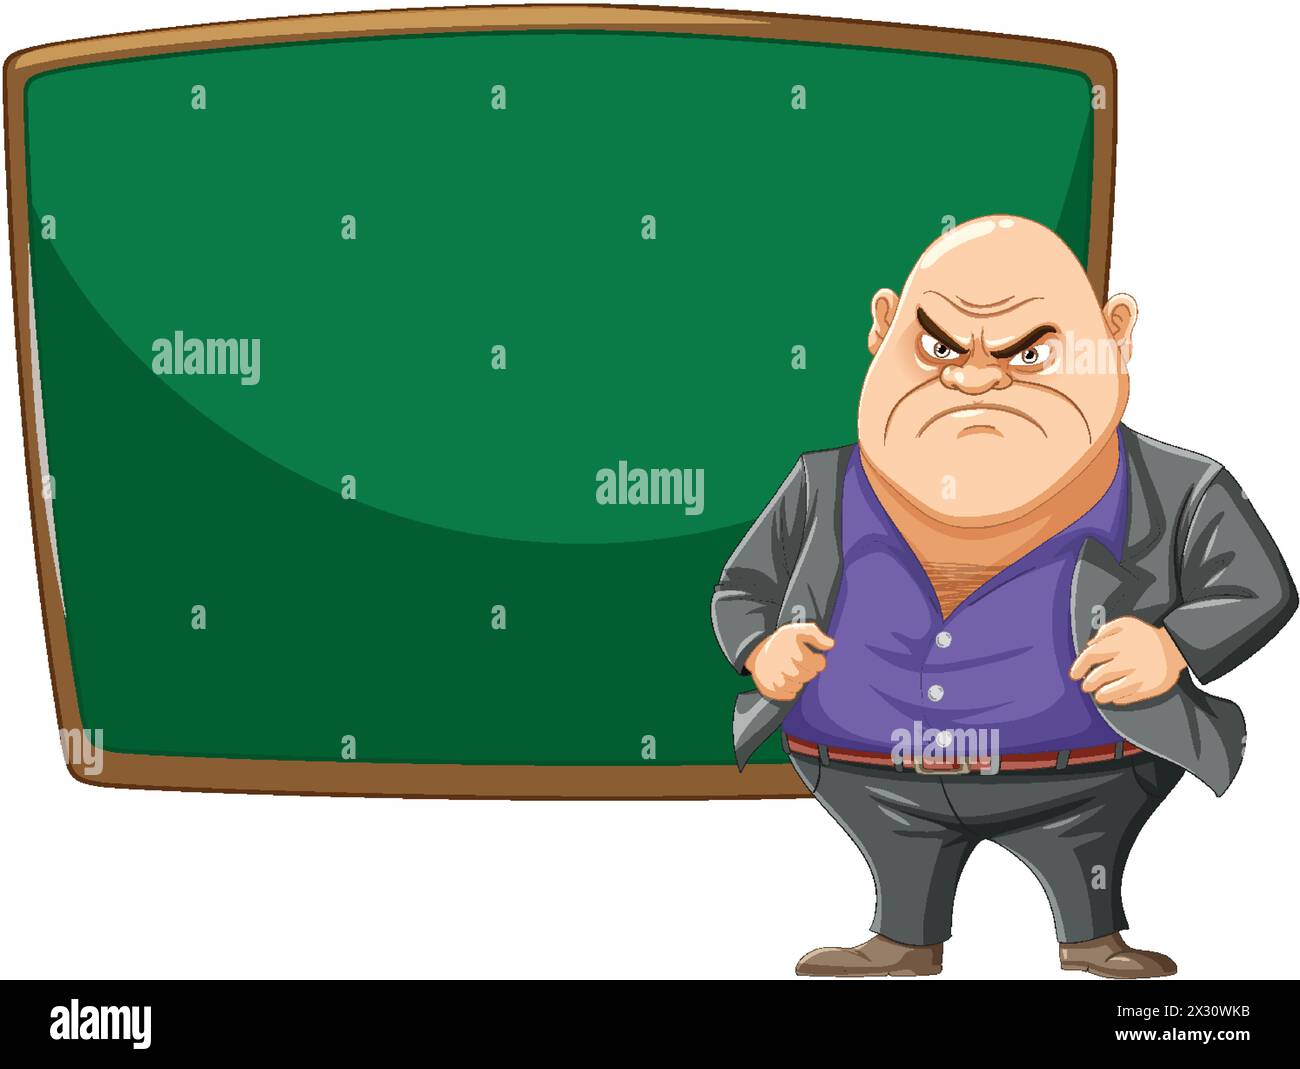 An angry cartoon character in front of a board Stock Vector